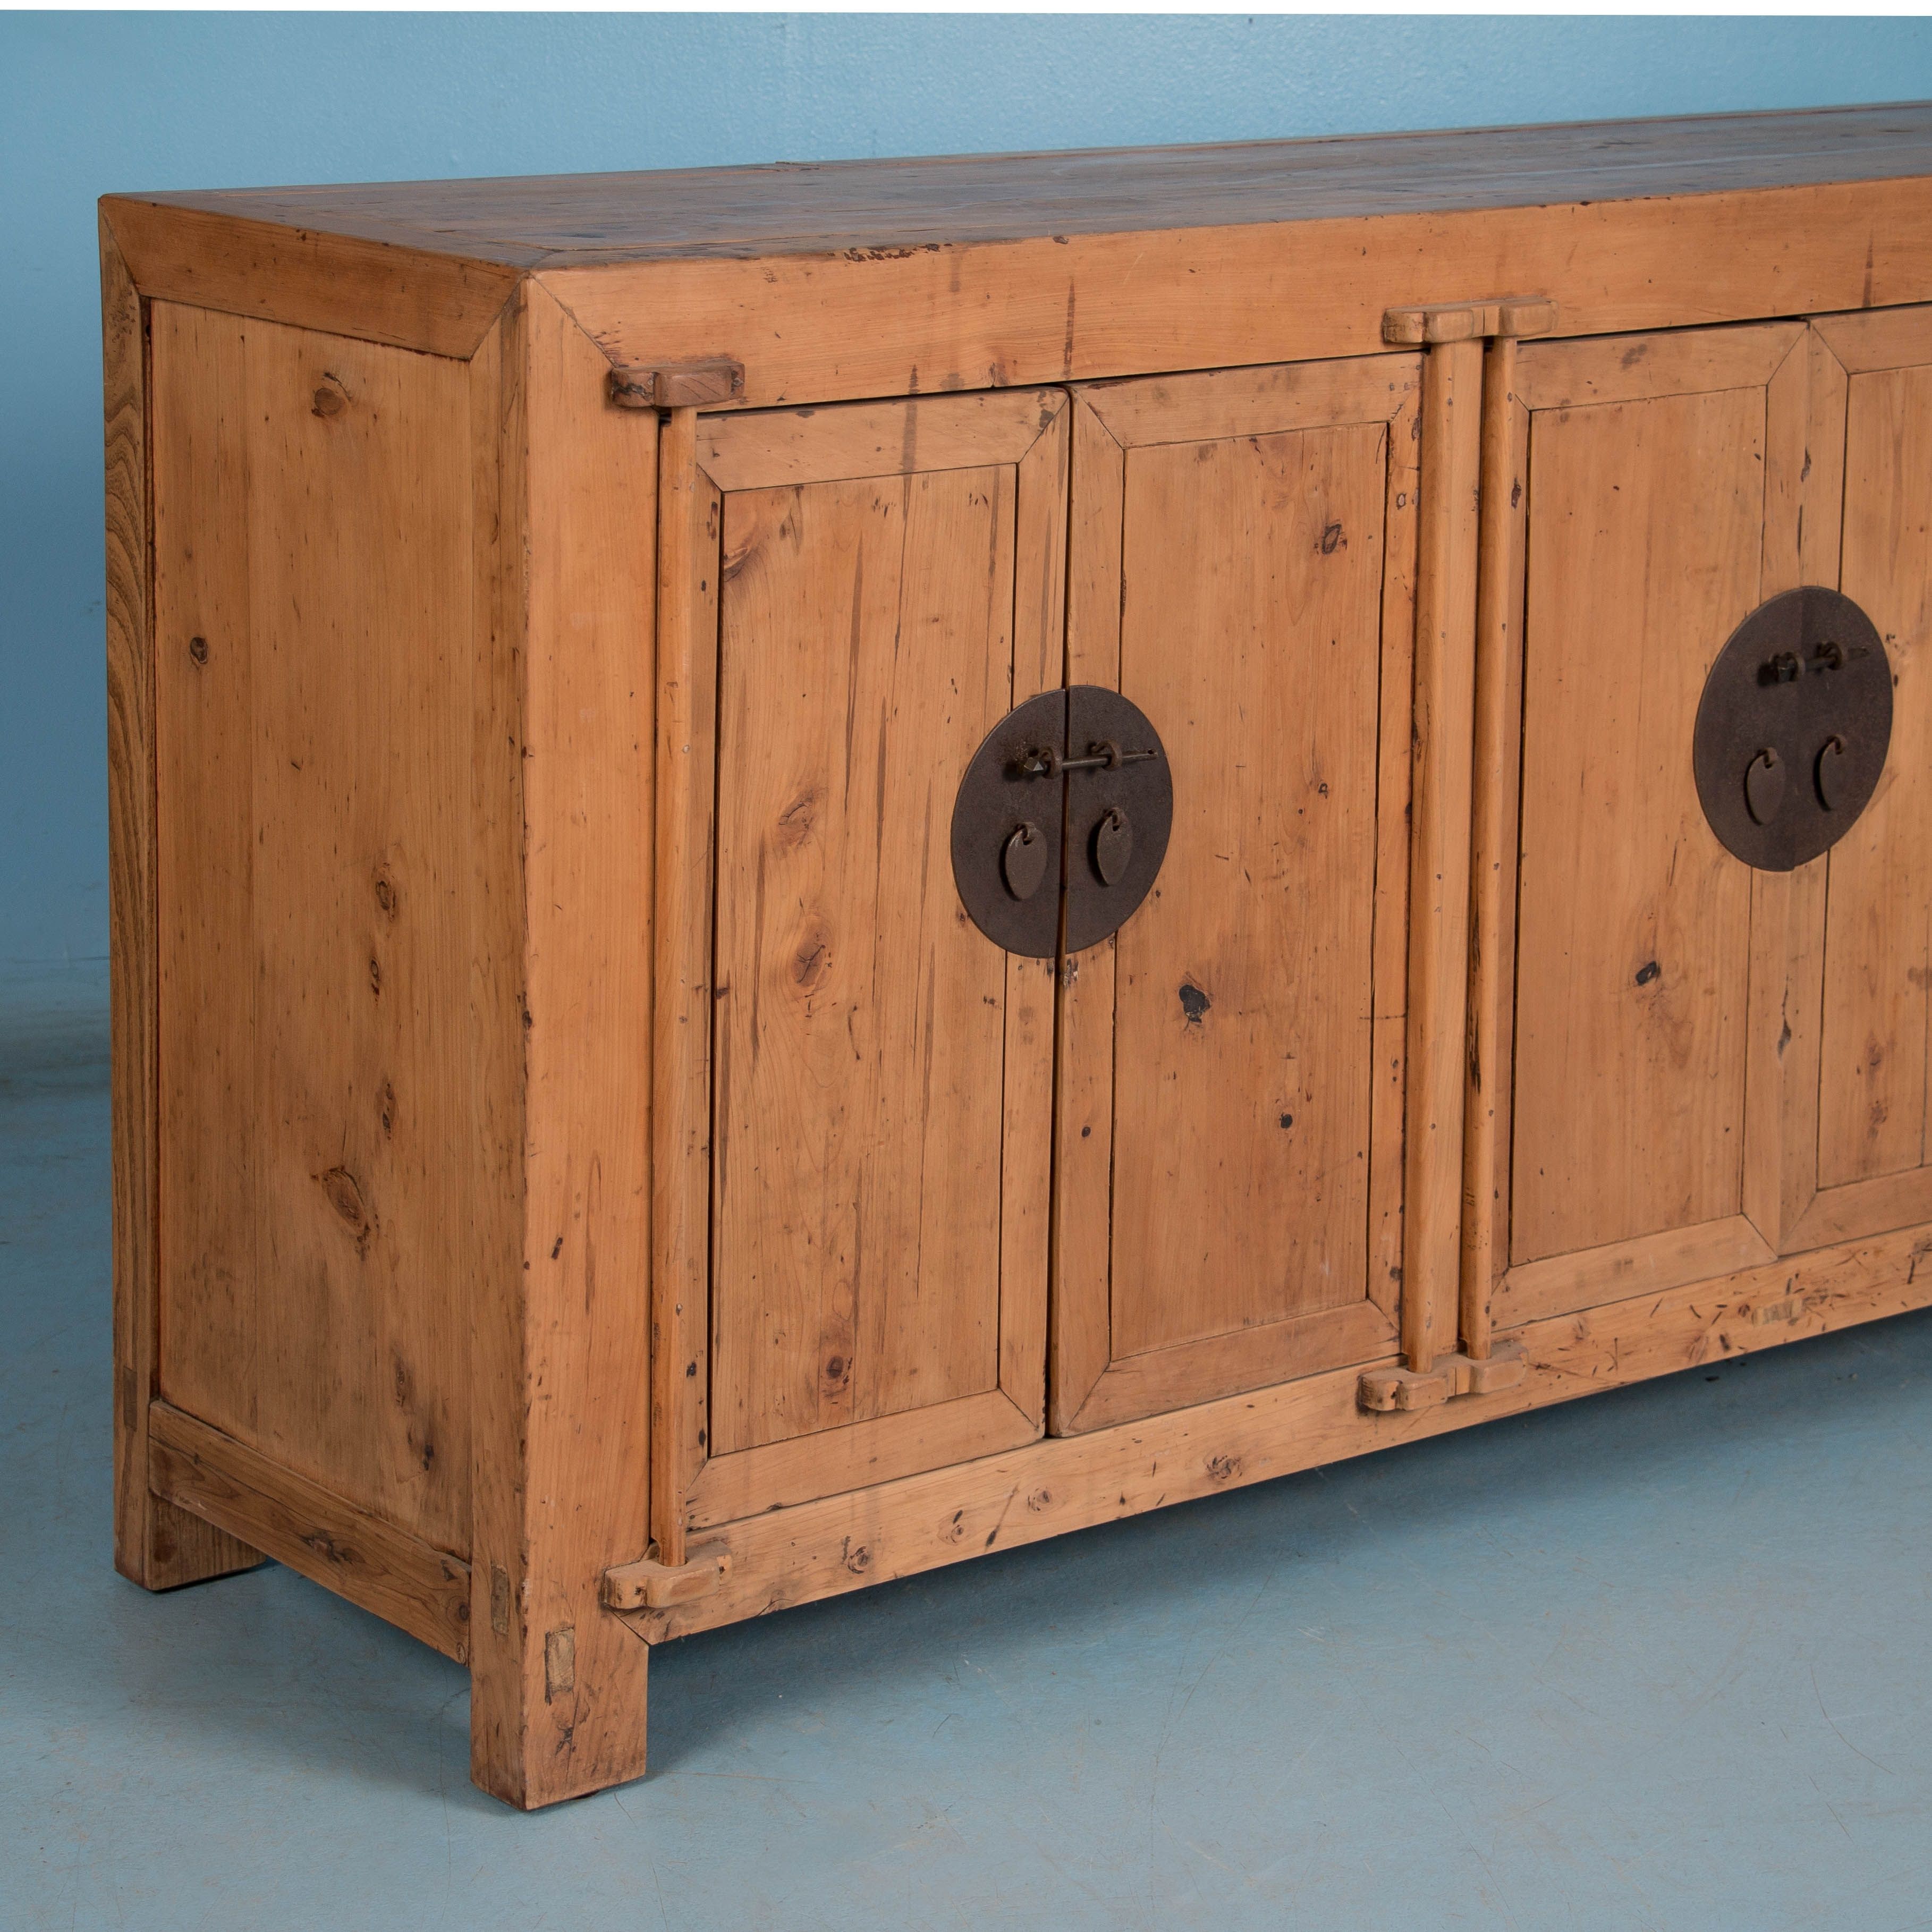 Sideboards | Scandinavian Antiques | Antique Furniture For Sale Throughout 2017 Natural South Pine Sideboards (View 8 of 20)